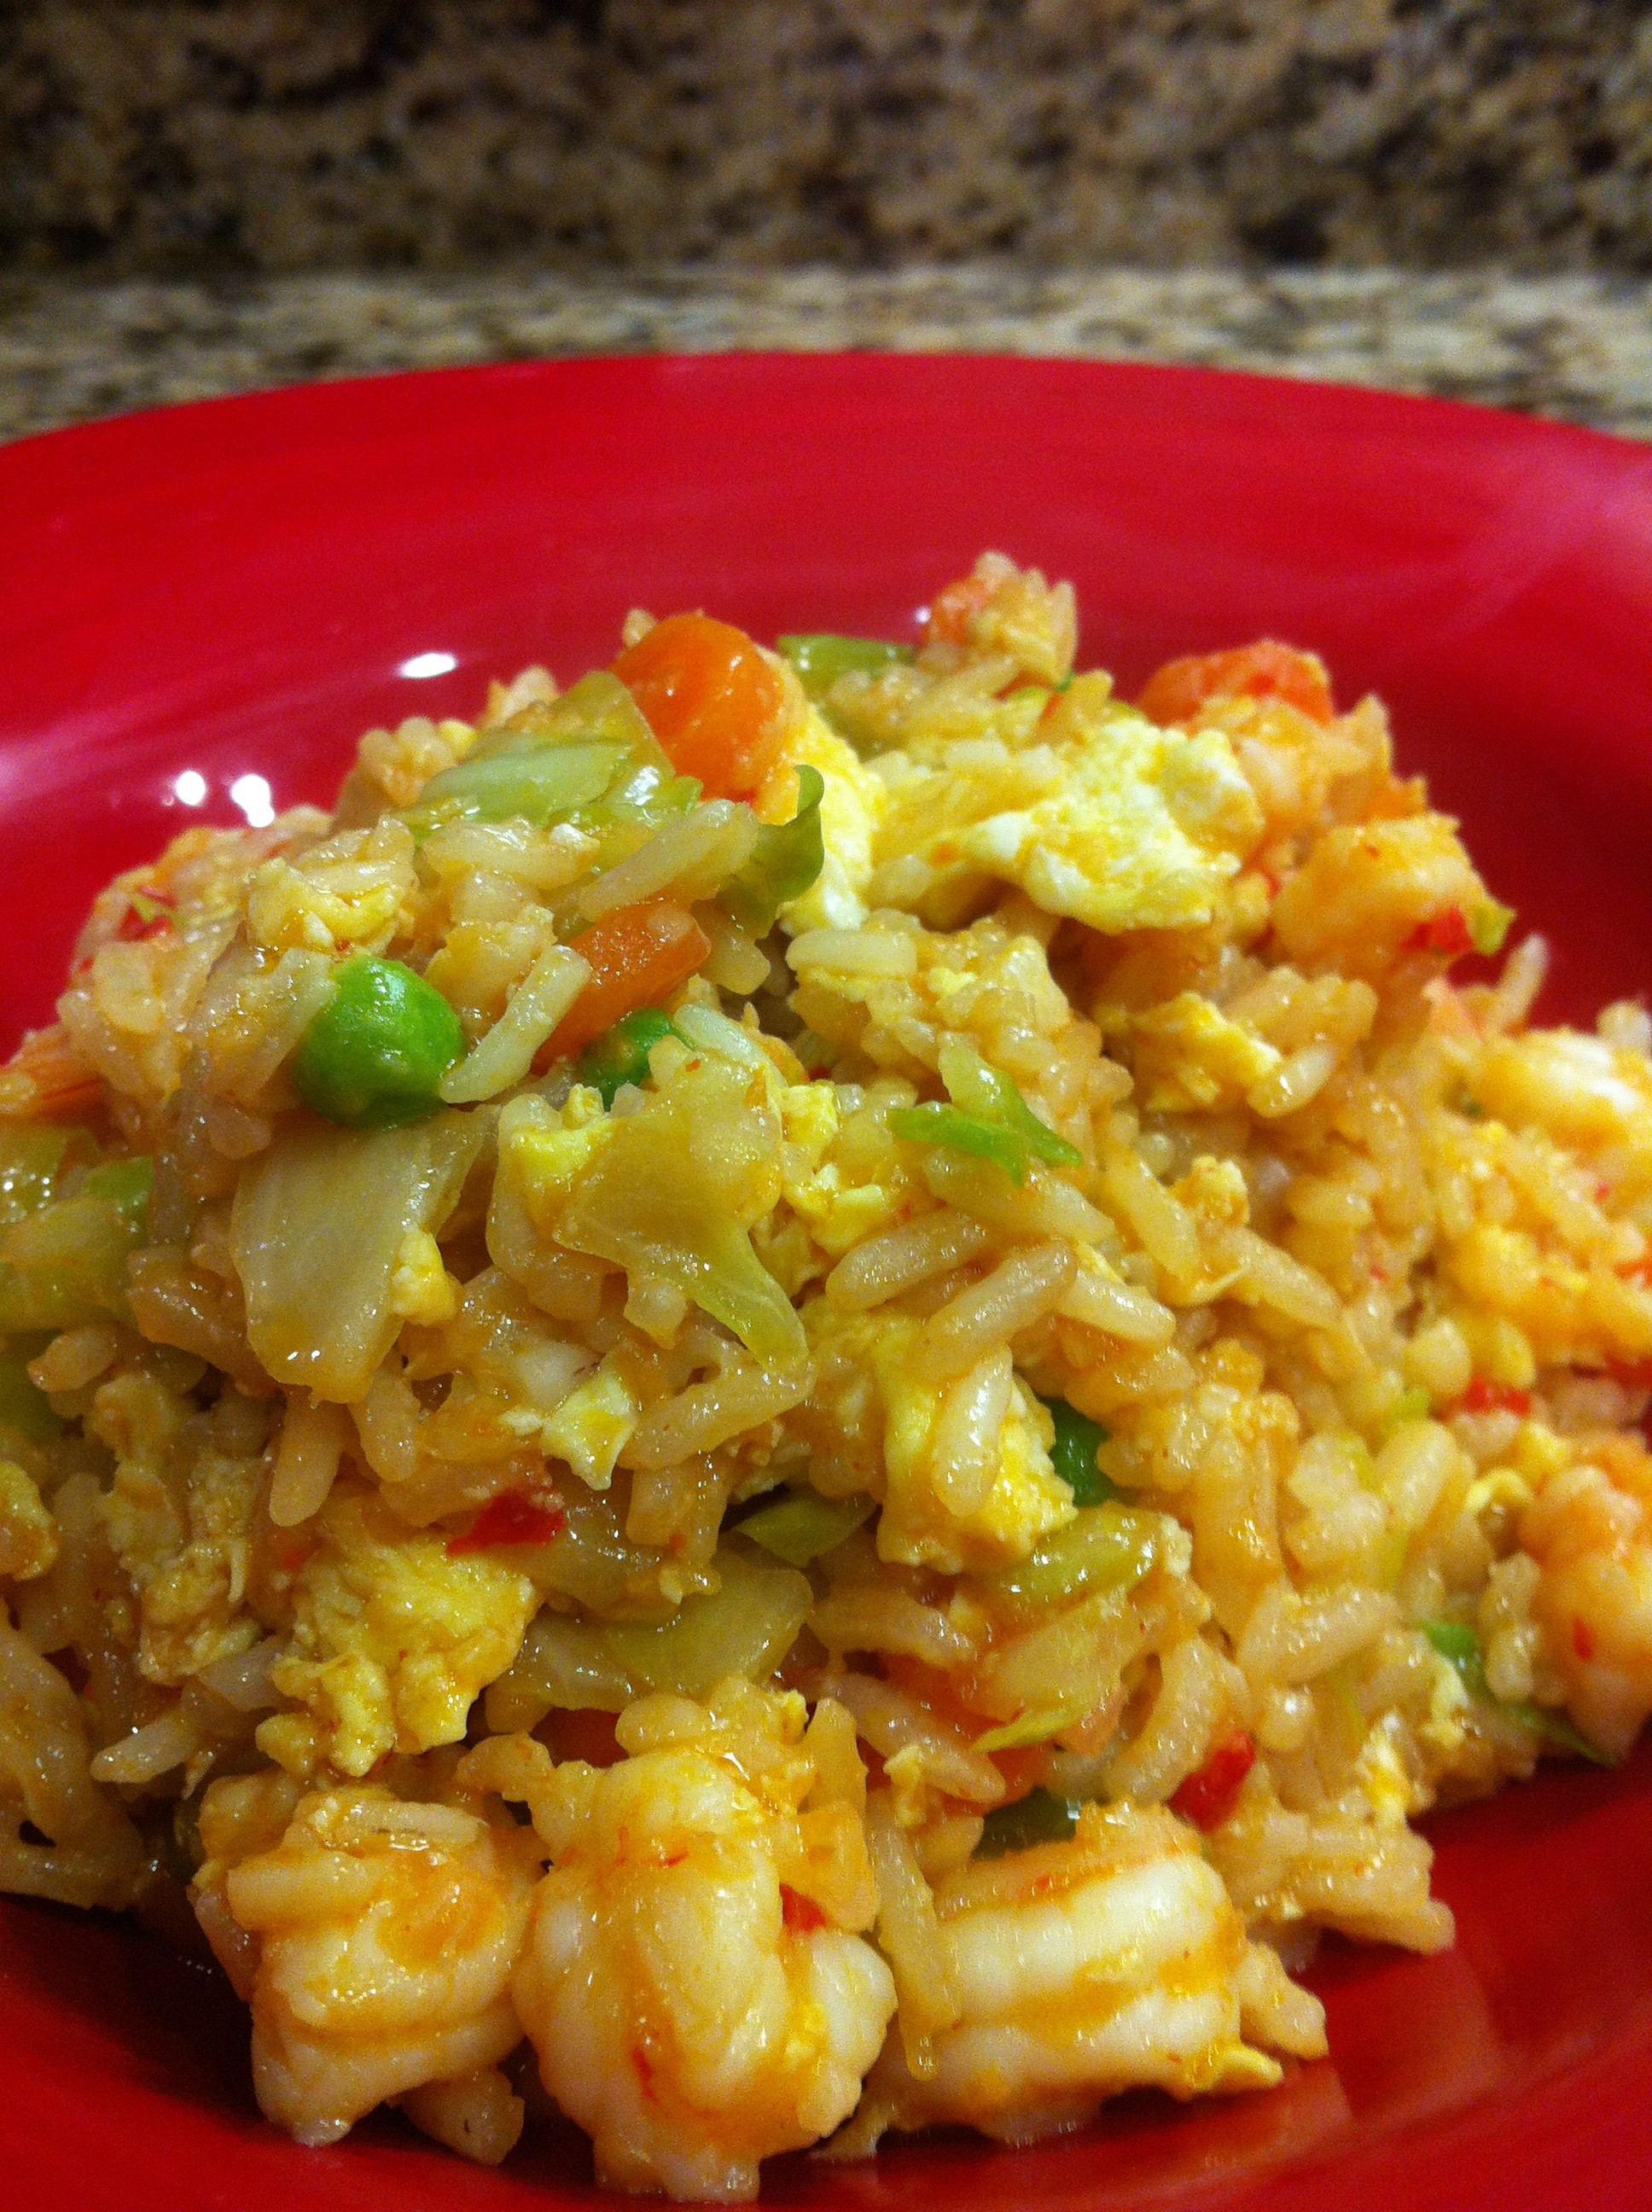 Shrimp Fried Rice Recipe Healthy
 Spicy Fried Rice With Shrimp RunStylish